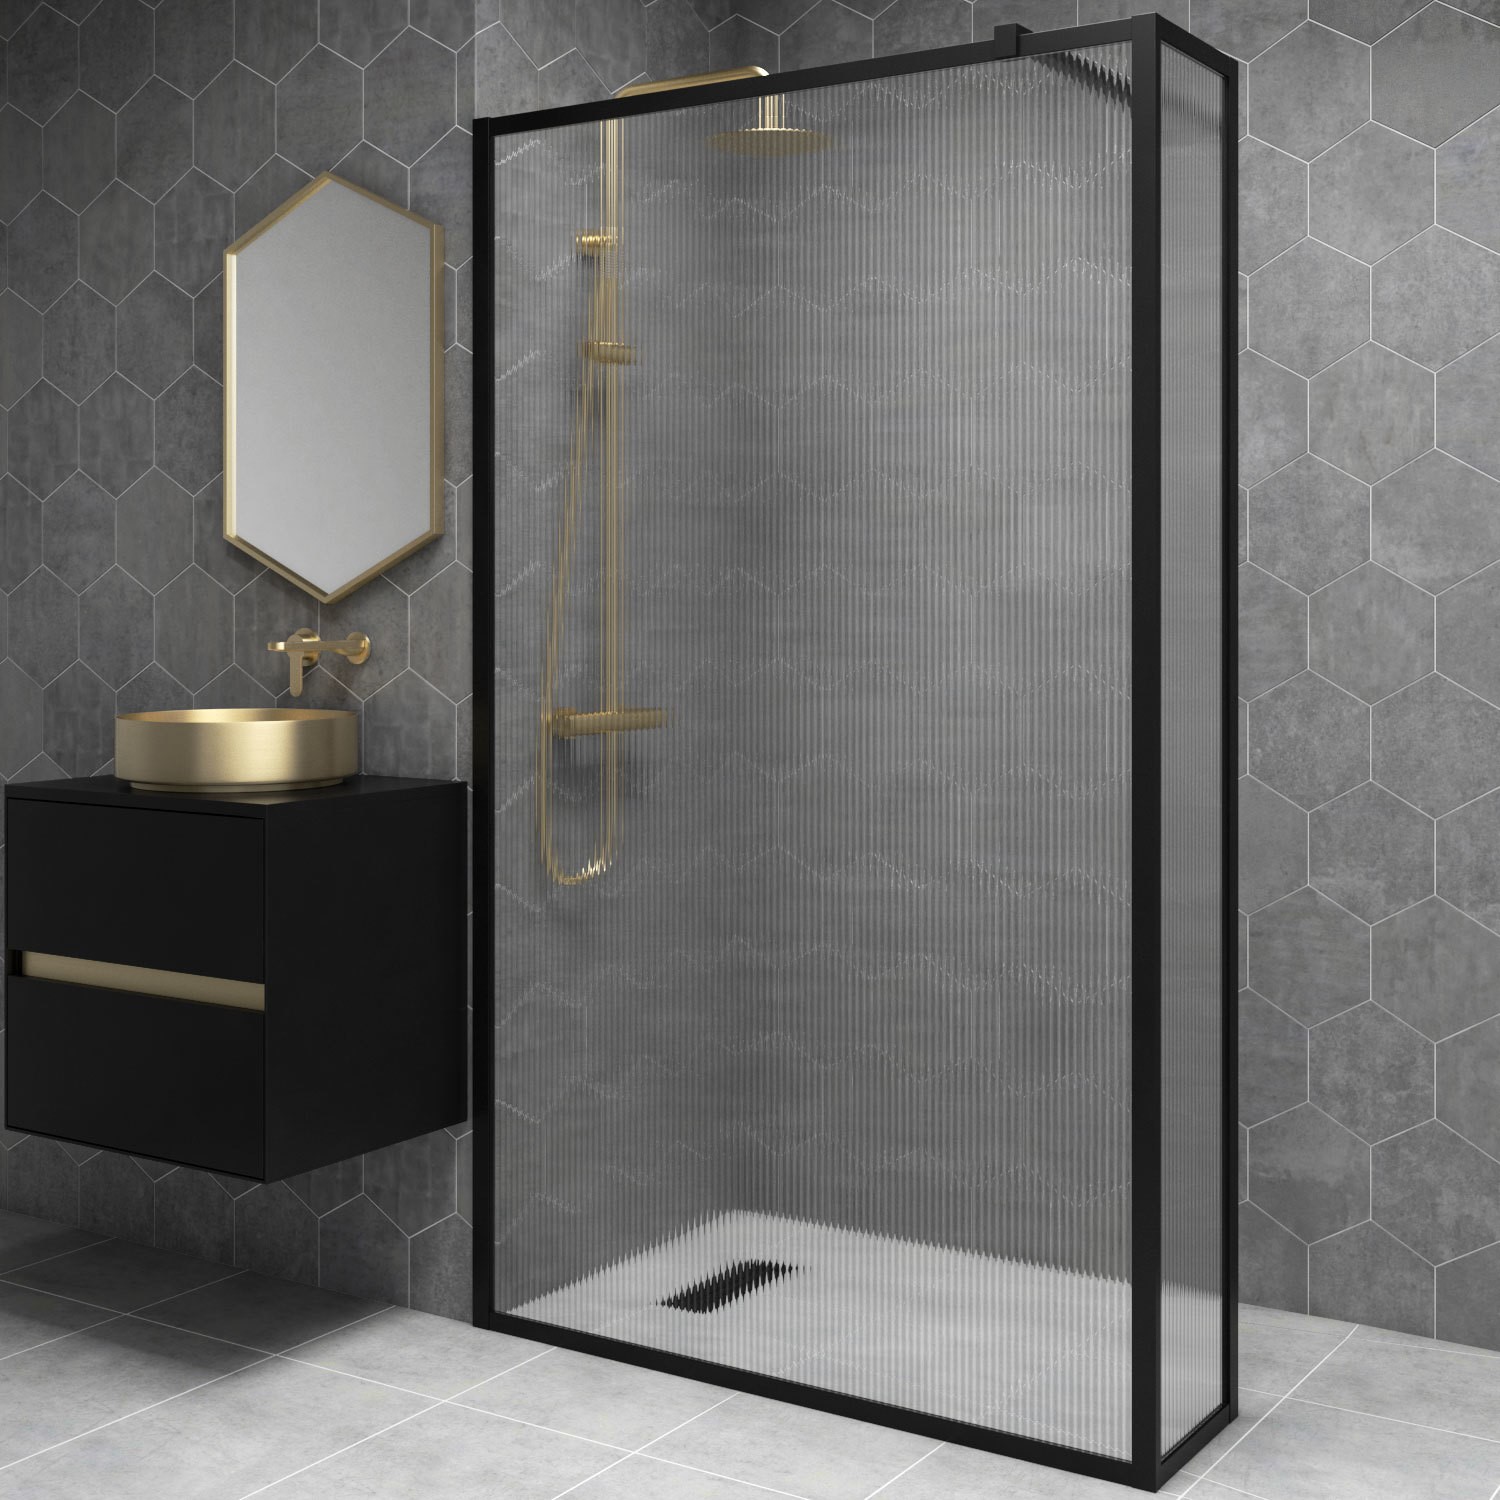 Black 1200mm Fluted Glass Wet Room Shower Screen with Wall Support Bar & Reutrn Panel - Volan